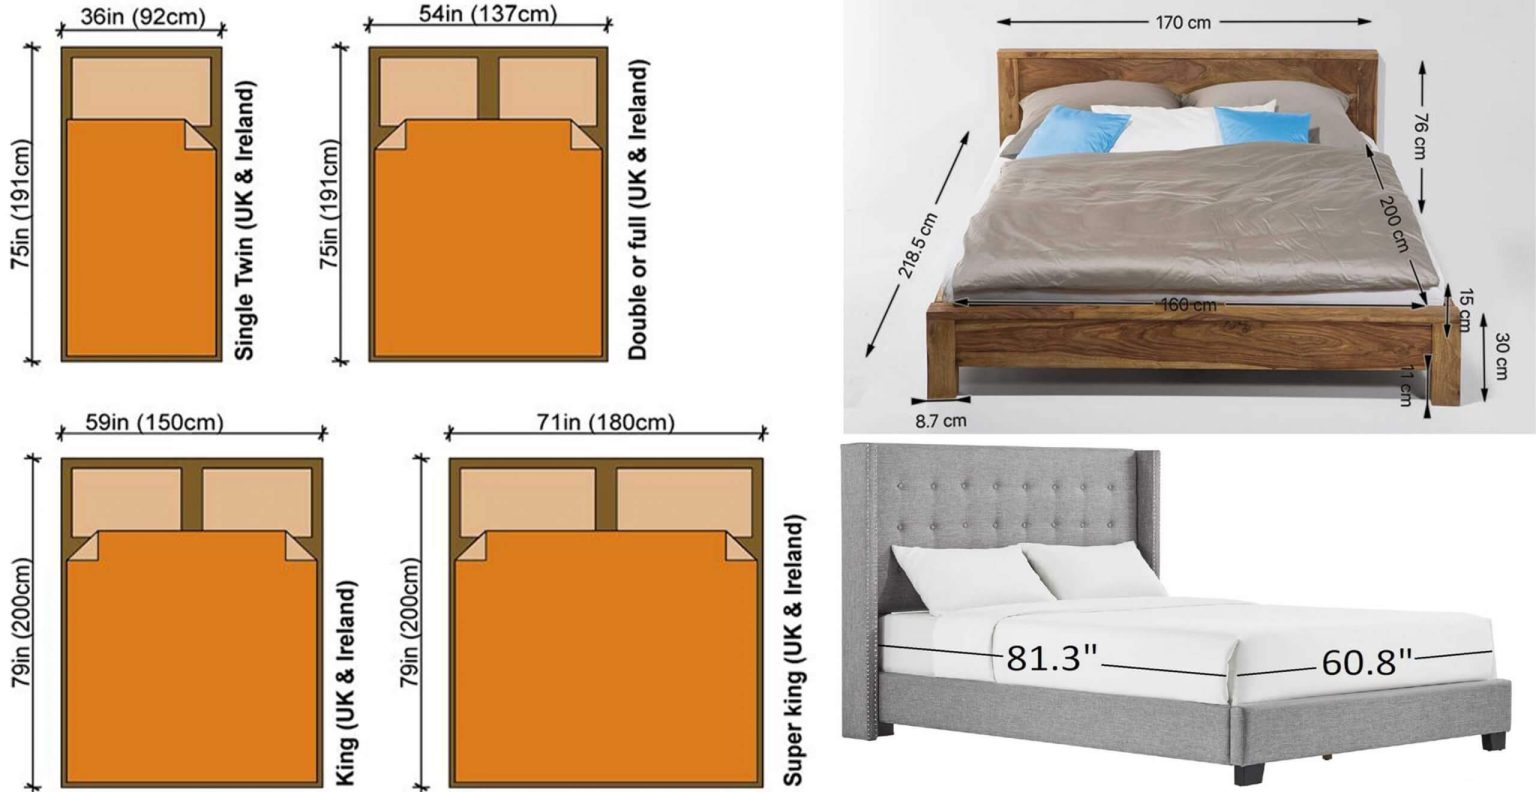 dimensions of furniture for a bedroom